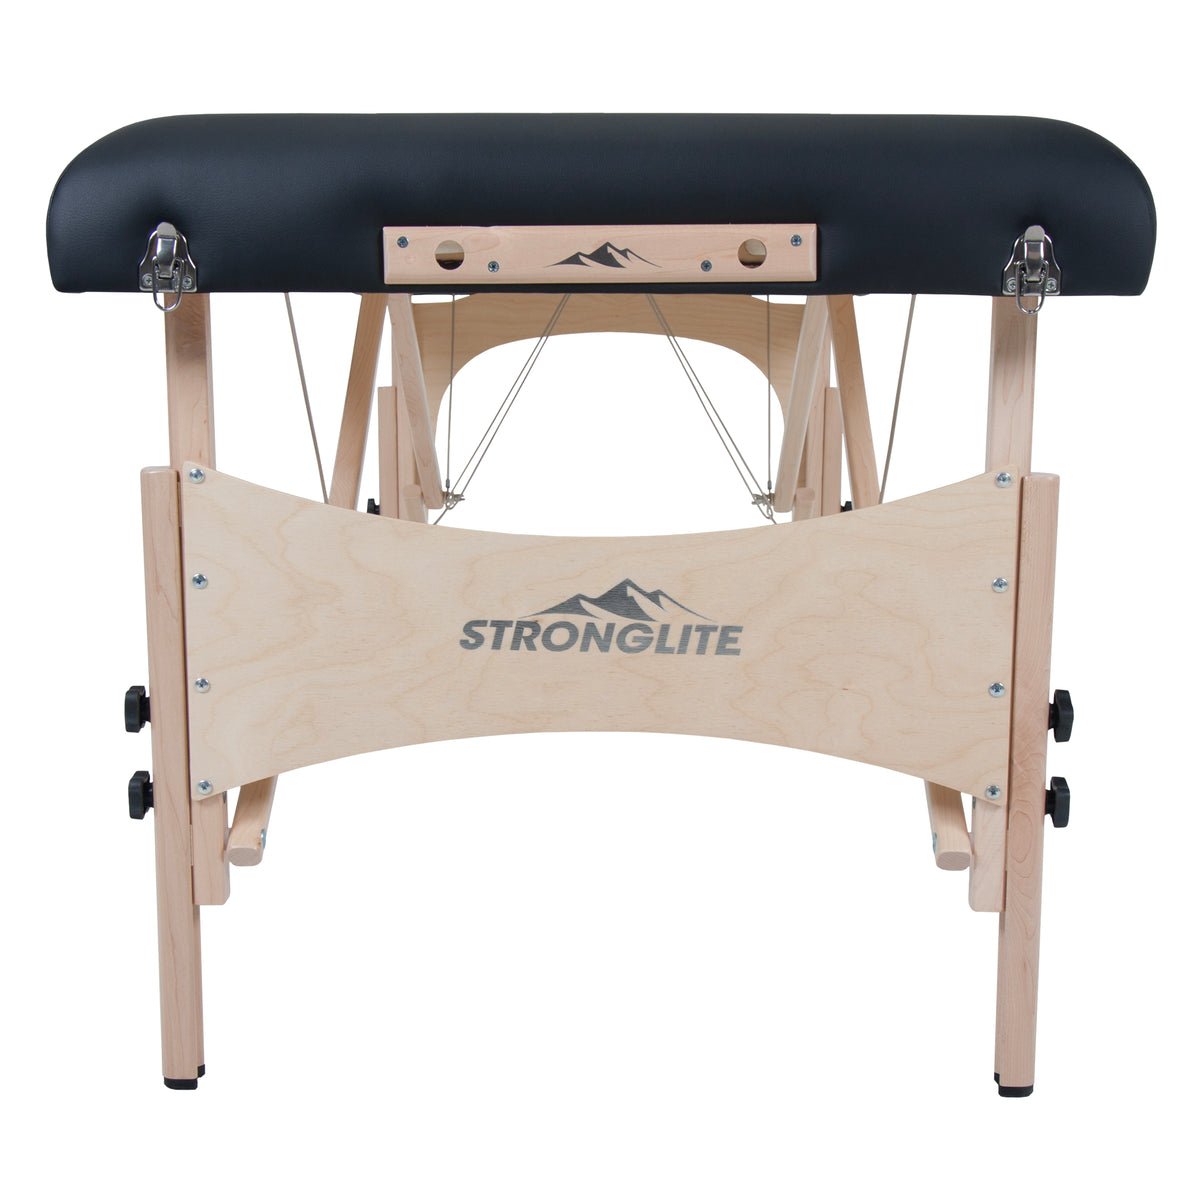 Stronglite - Classic Deluxe Portable Massage Table Package 30&quot; - Superb Massage Tables